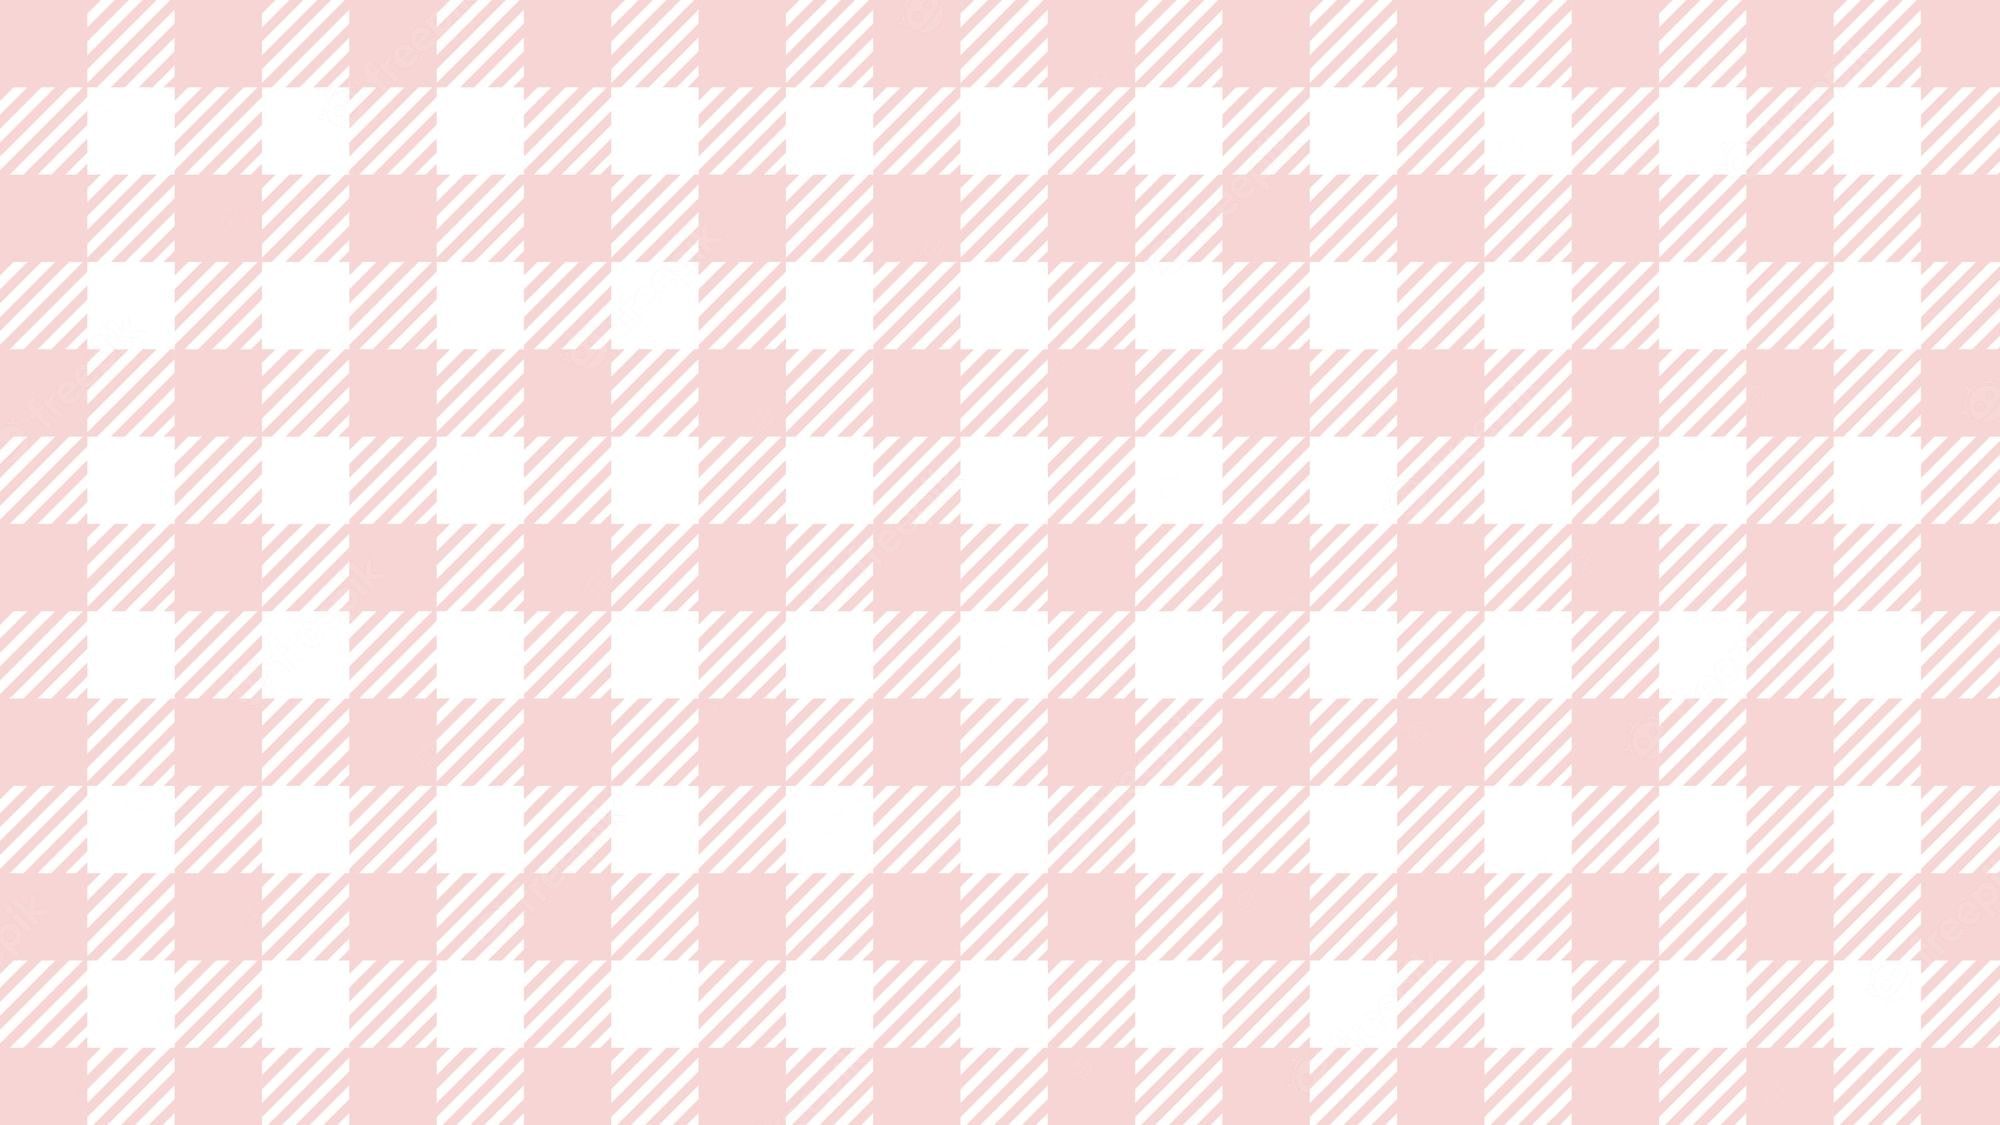 Premium Vector. Aesthetic soft pastel pink tartan gingham plaid checkers pattern wallpaper illustration perfect for banner wallpaper backdrop postcard background for your design